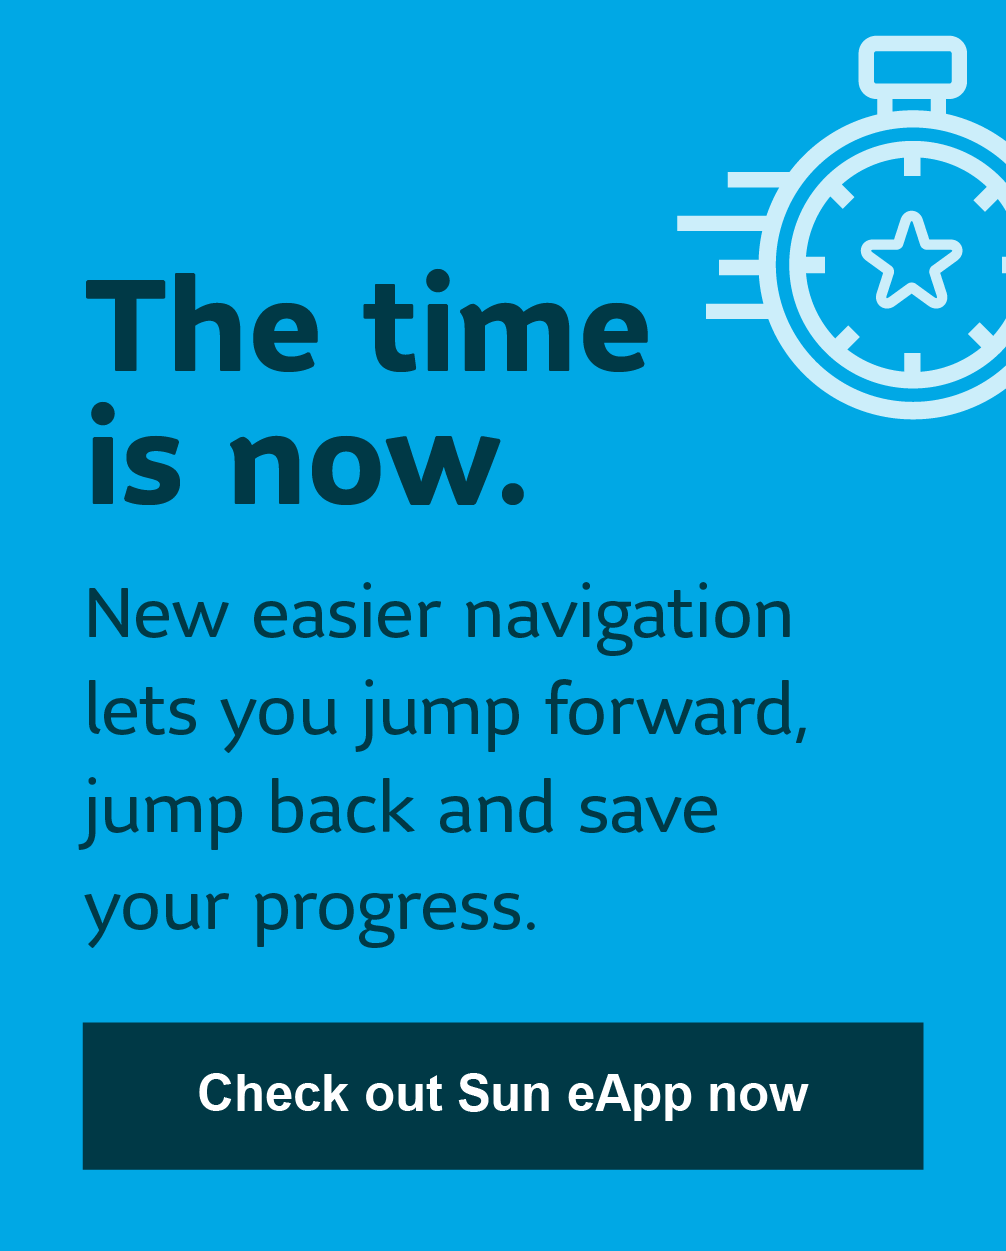 Check out Sun eApp now